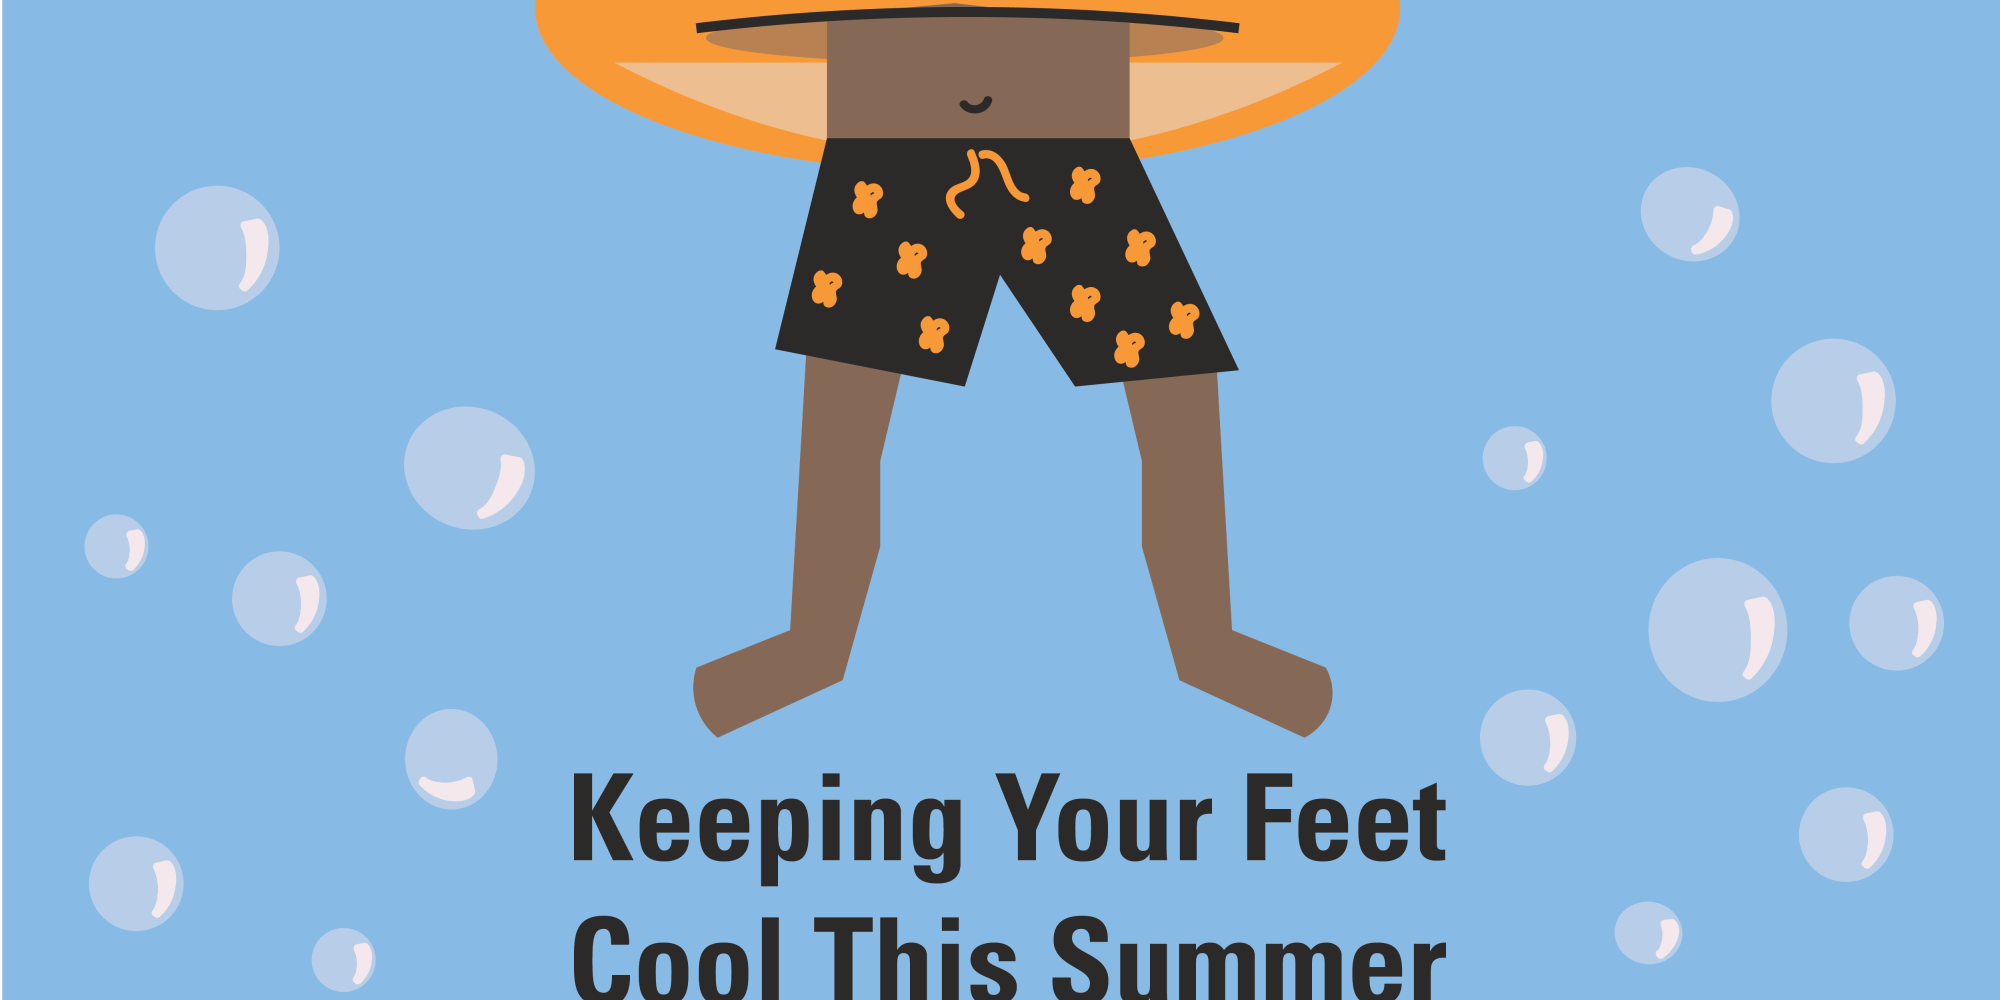 How to Keep Your Feet Cool This Summer